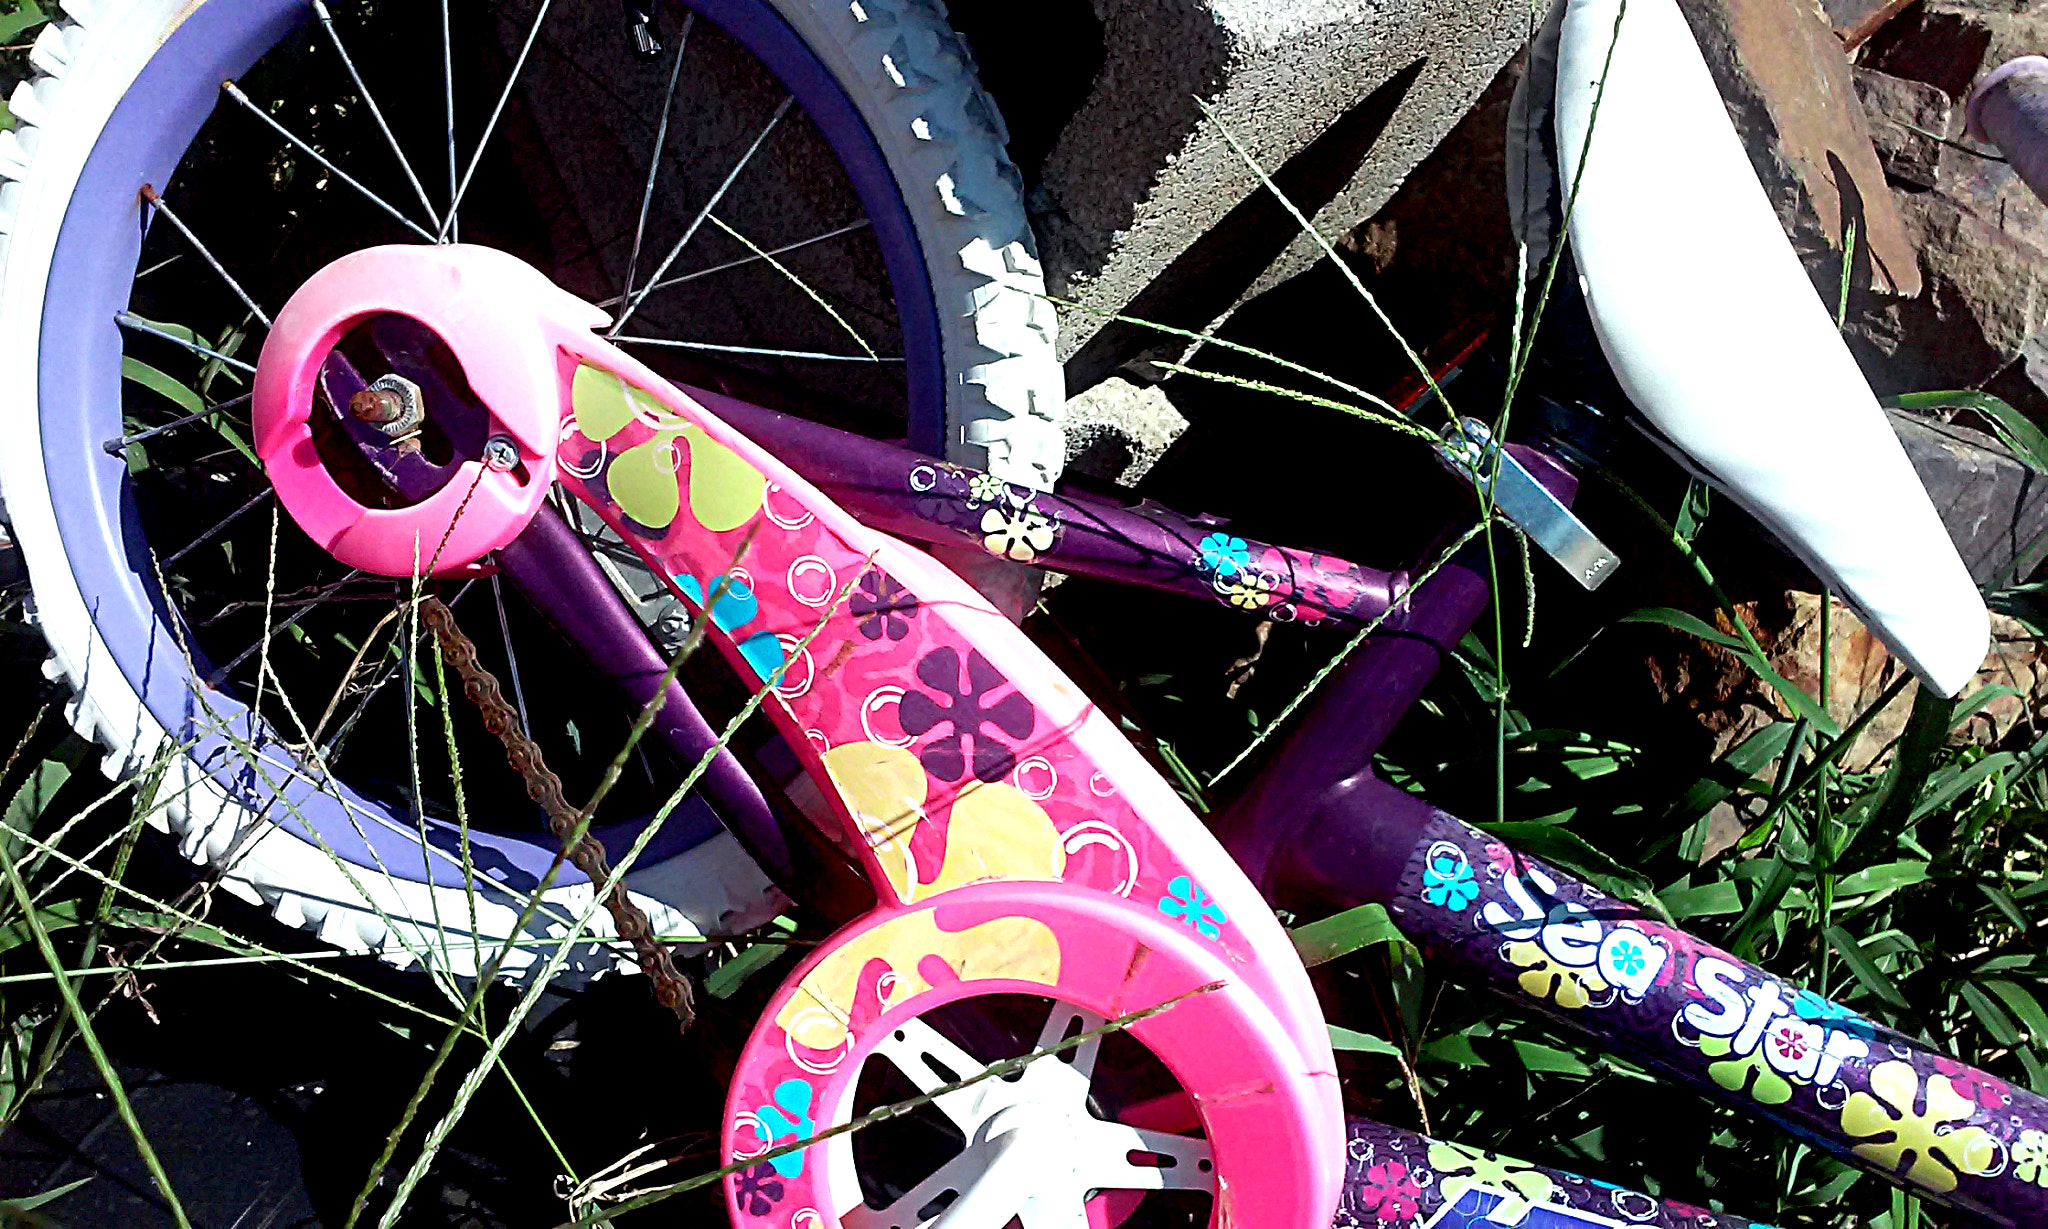 LG L70 CDMA sample photo. Discarded bicycle photography